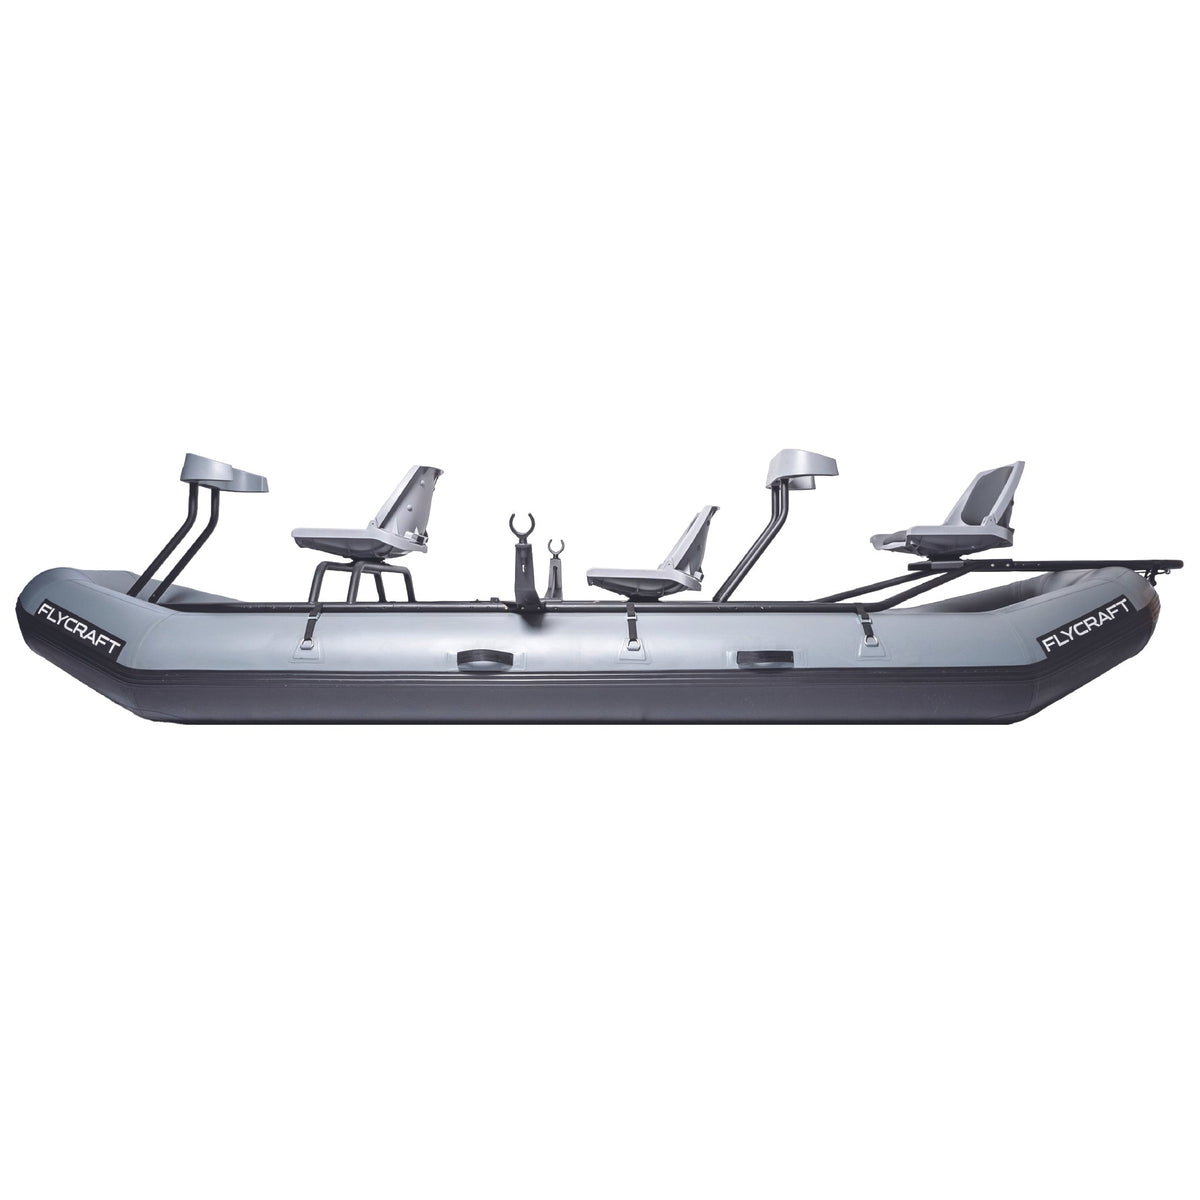 Cheap Fishing Boat with Motor and Trailer Carp Fishing Boat Plastic Hulls Fishing  for Sale - China Cheap Fishing Boat with Motor and Trailer Carp Fishing  Boat price